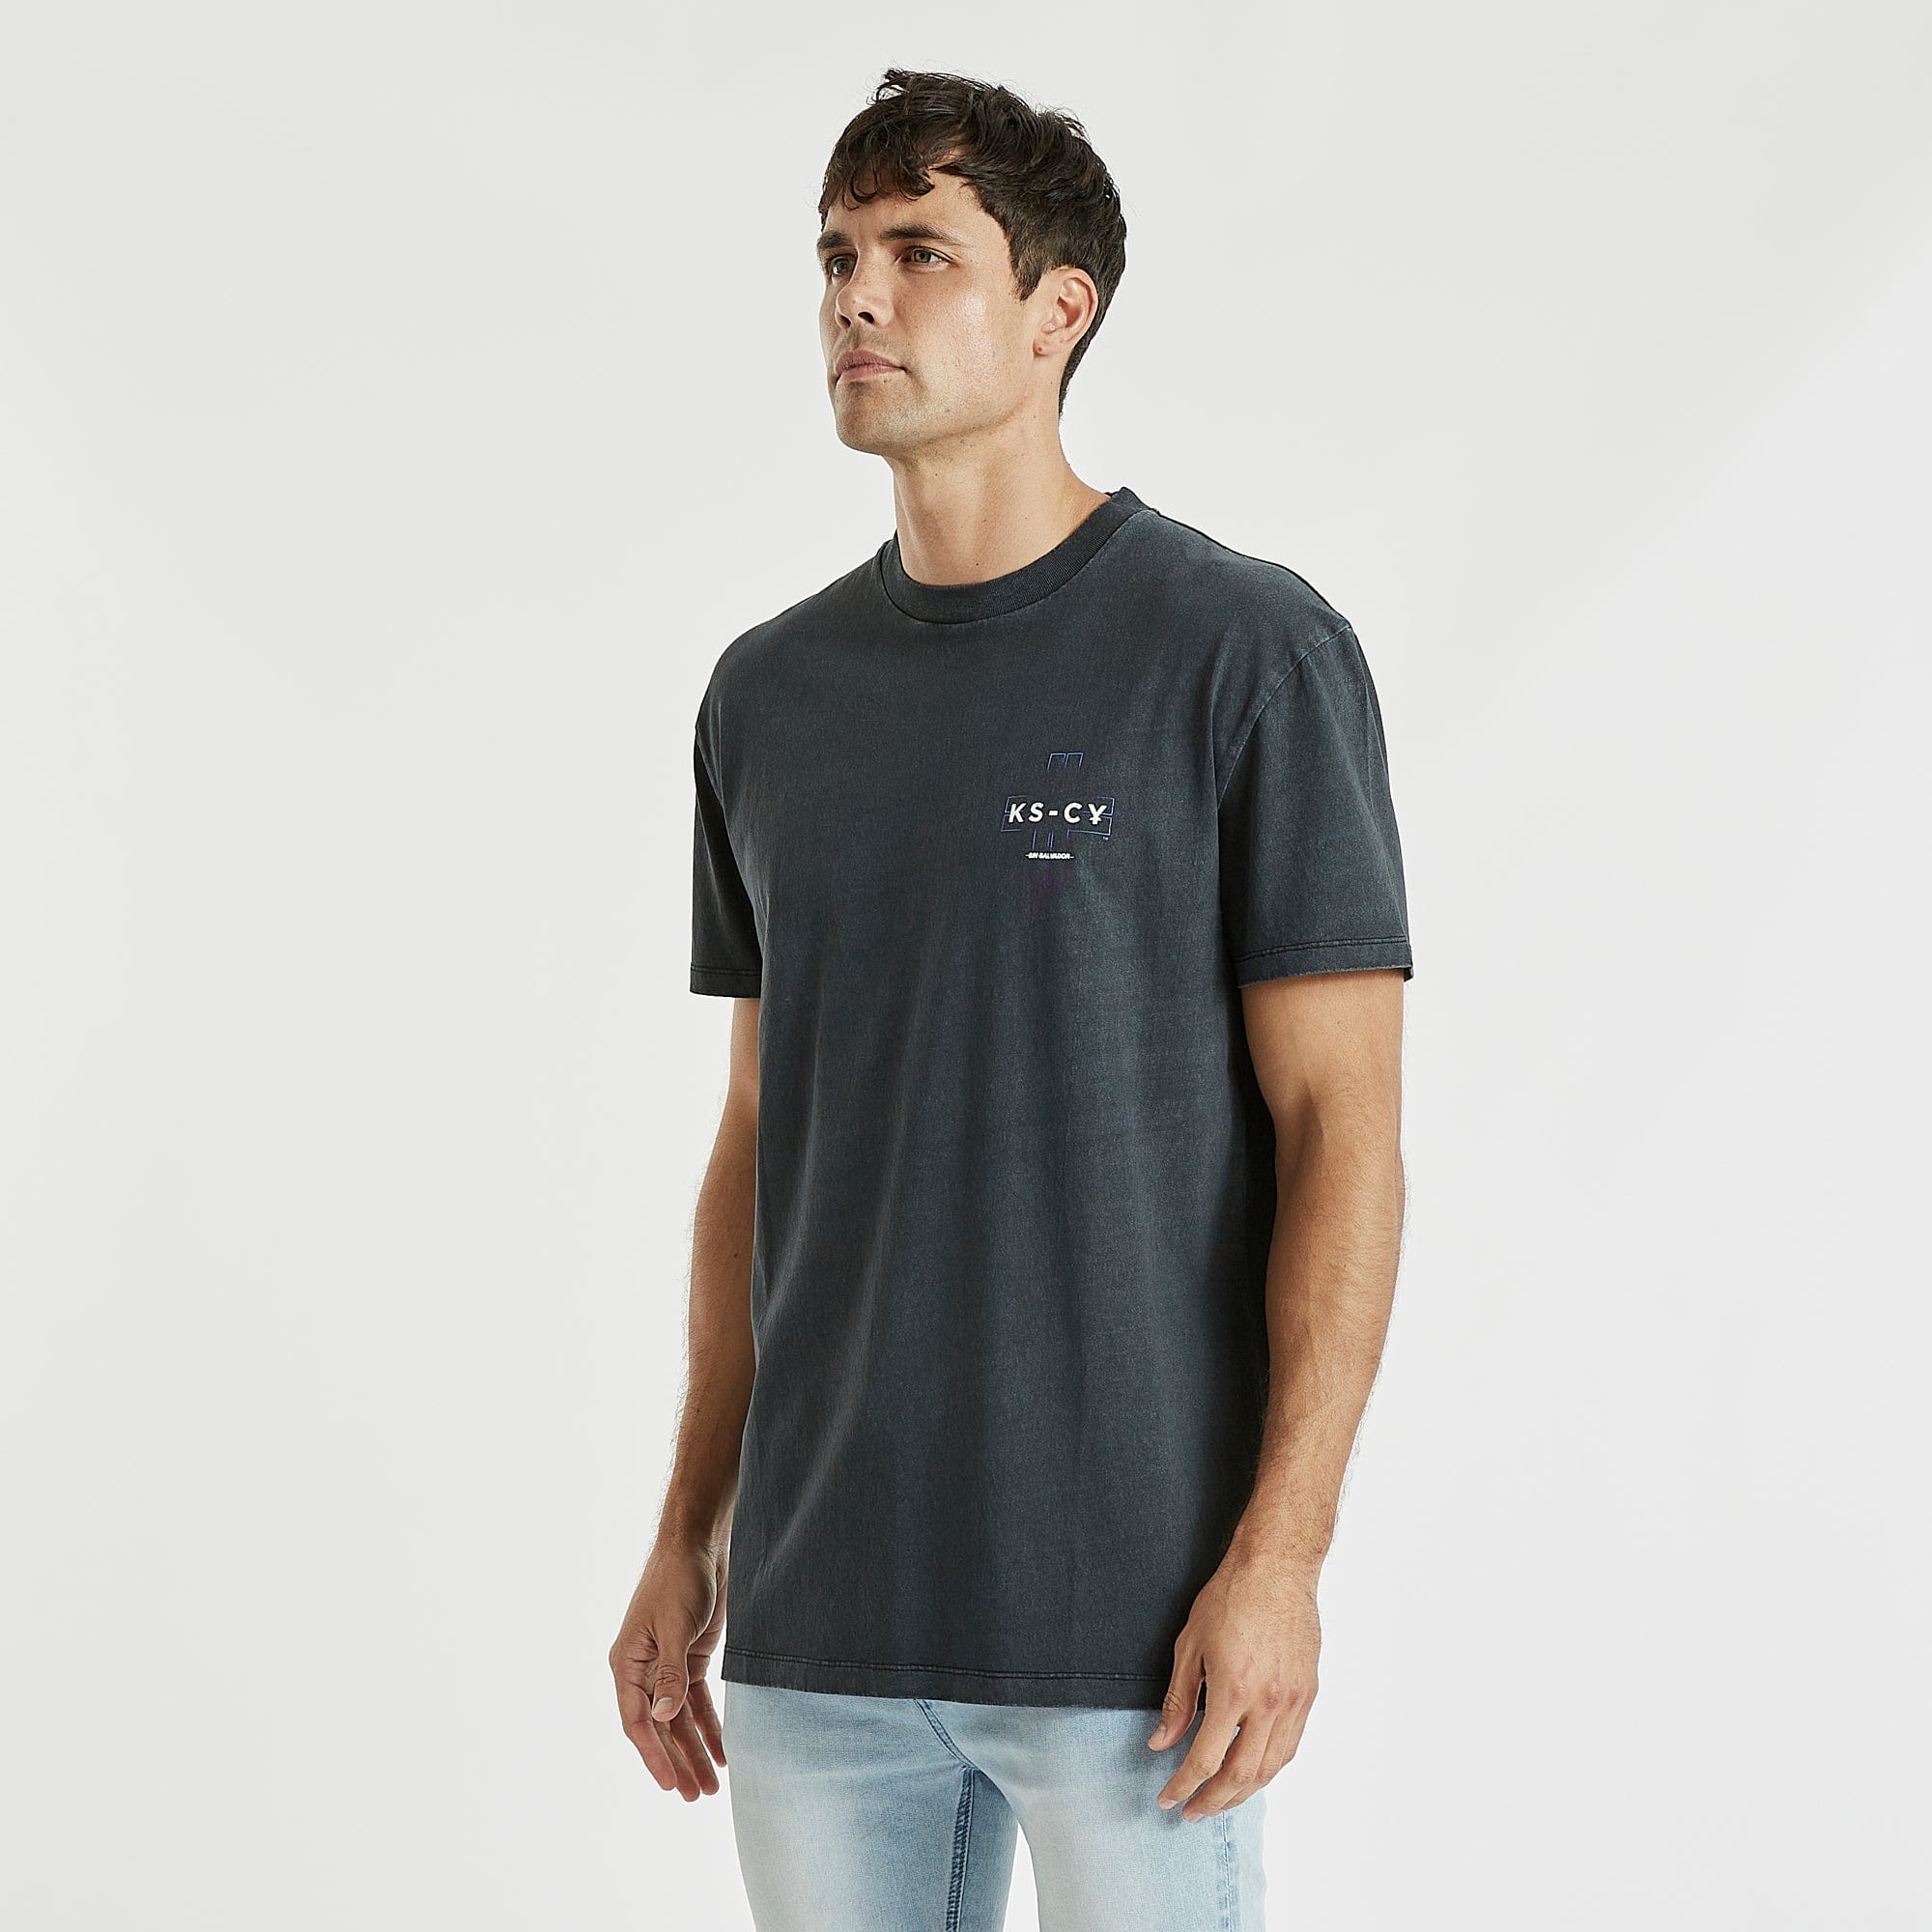 Random Relaxed T-Shirt Pigment Anthracite Black